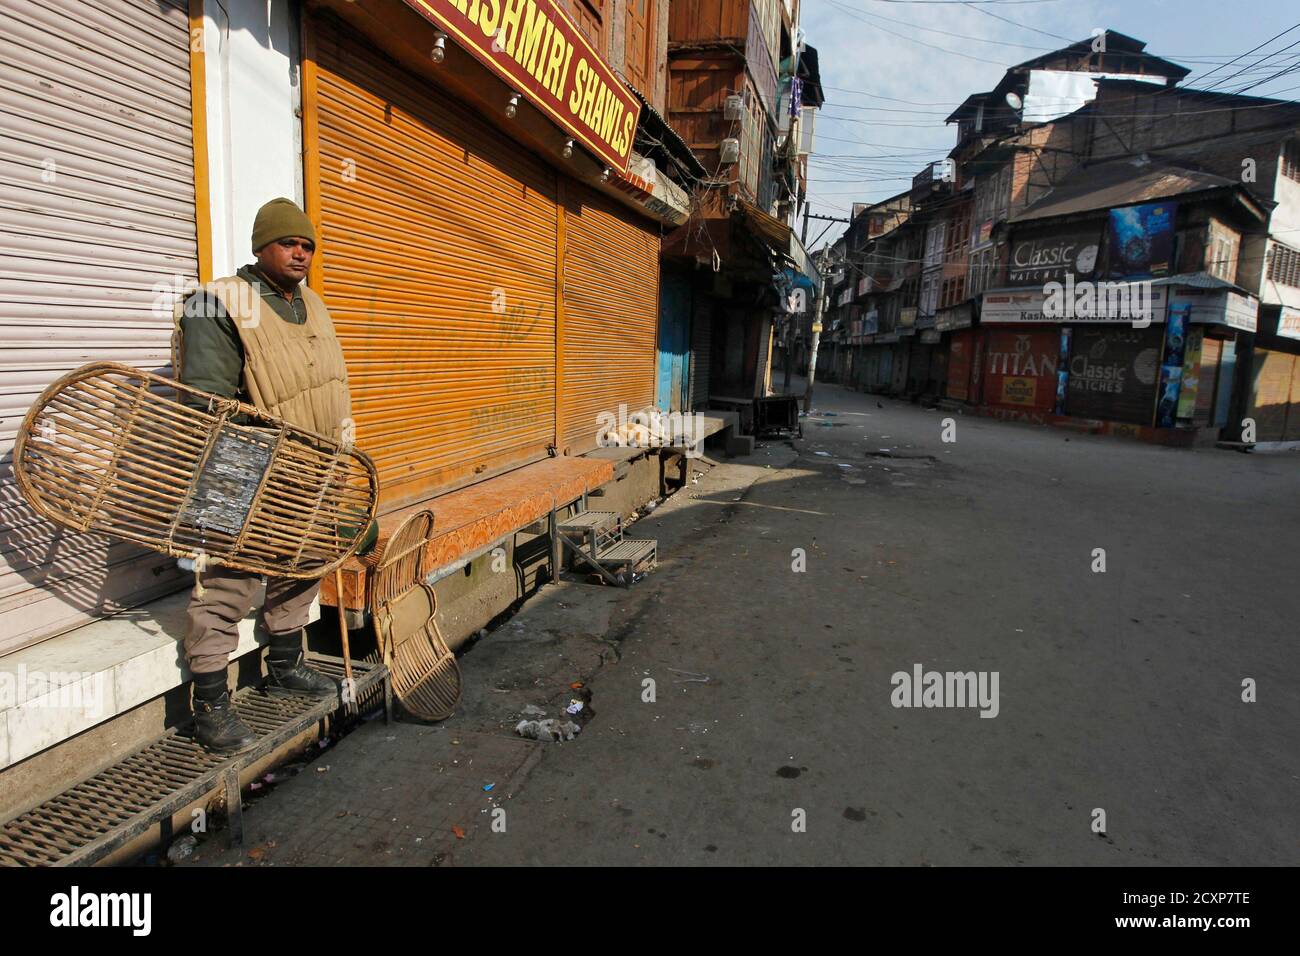 An Indian policeman keeps guard in front of the closed shops during a curfew in Srinagar February 12, 2013. India hanged Mohammad Afzal Guru, a Kashmiri man, on Saturday for an attack on the country's parliament in 2001, sparking clashes in Kashmir between protesters and police. Security forces had imposed a curfew in parts of Kashmir and ordered people off the streets. REUTERS/Danish Ismail (INDIAN-ADMINISTERED KASHMIR - Tags: POLITICS) Stock Photo